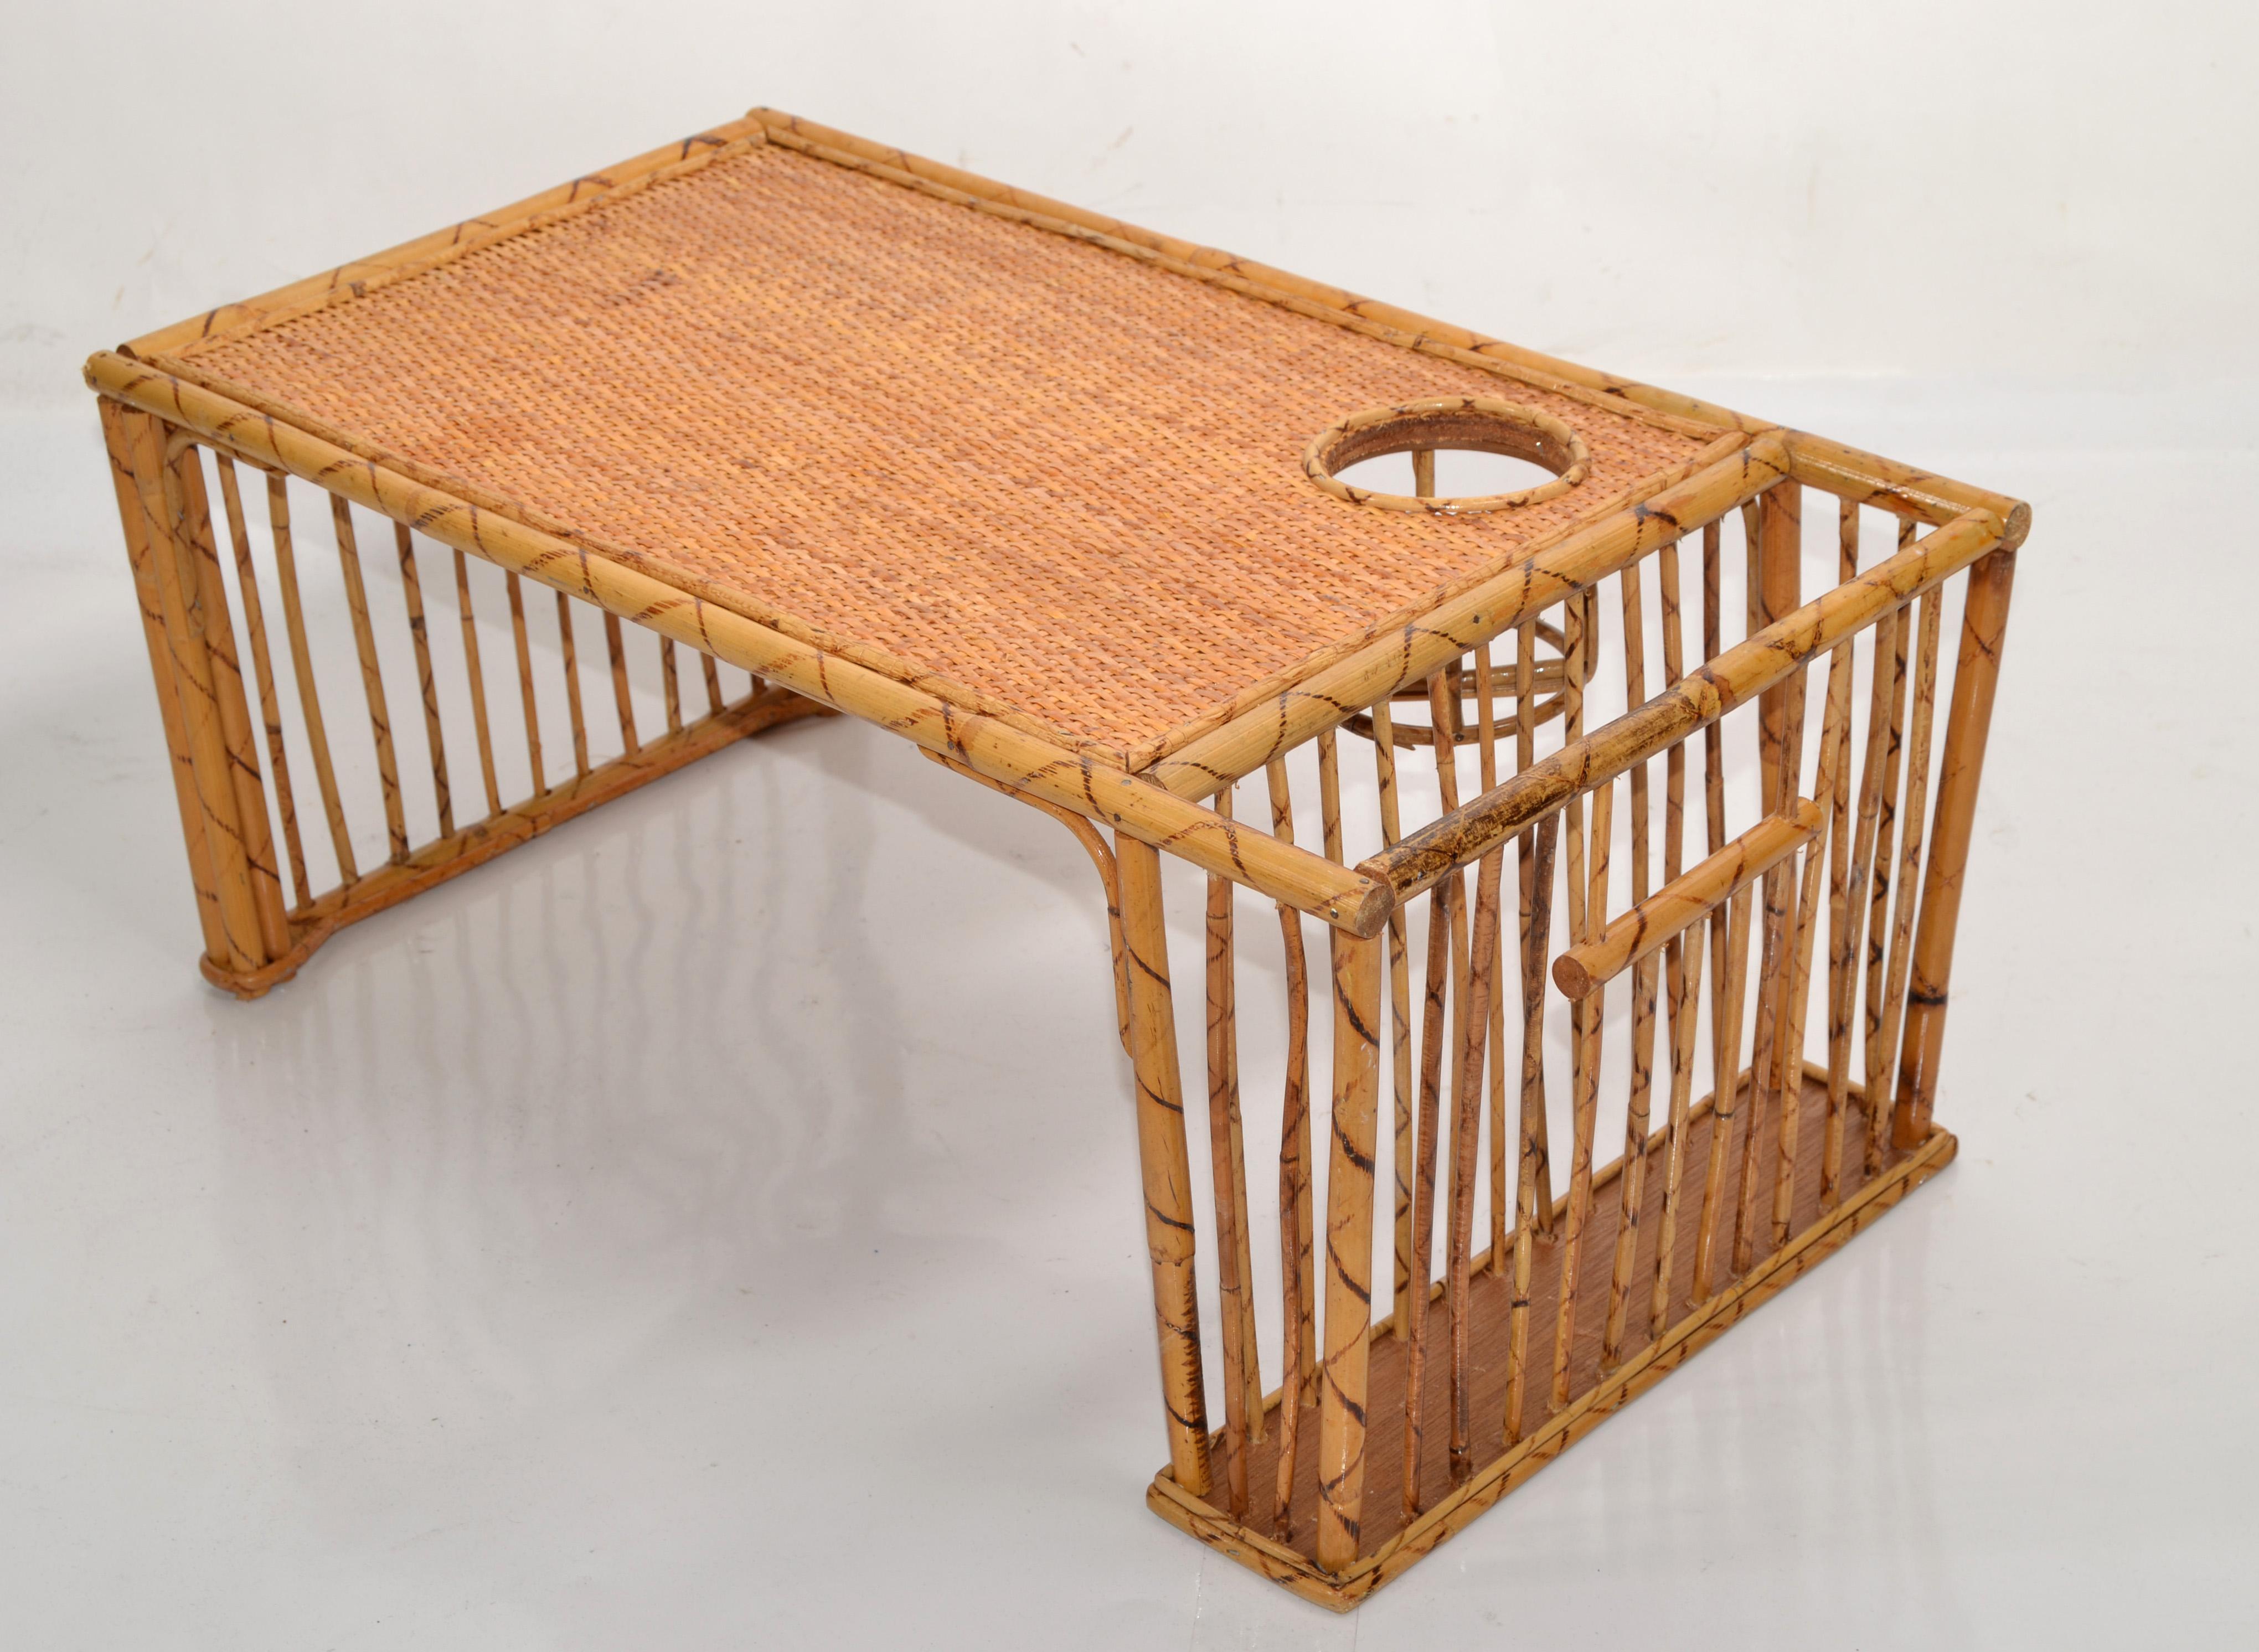 Chinese Export Bohemian Handwoven Reed Caning Bamboo Breakfast Bed Tray Table Cup Book Holder For Sale